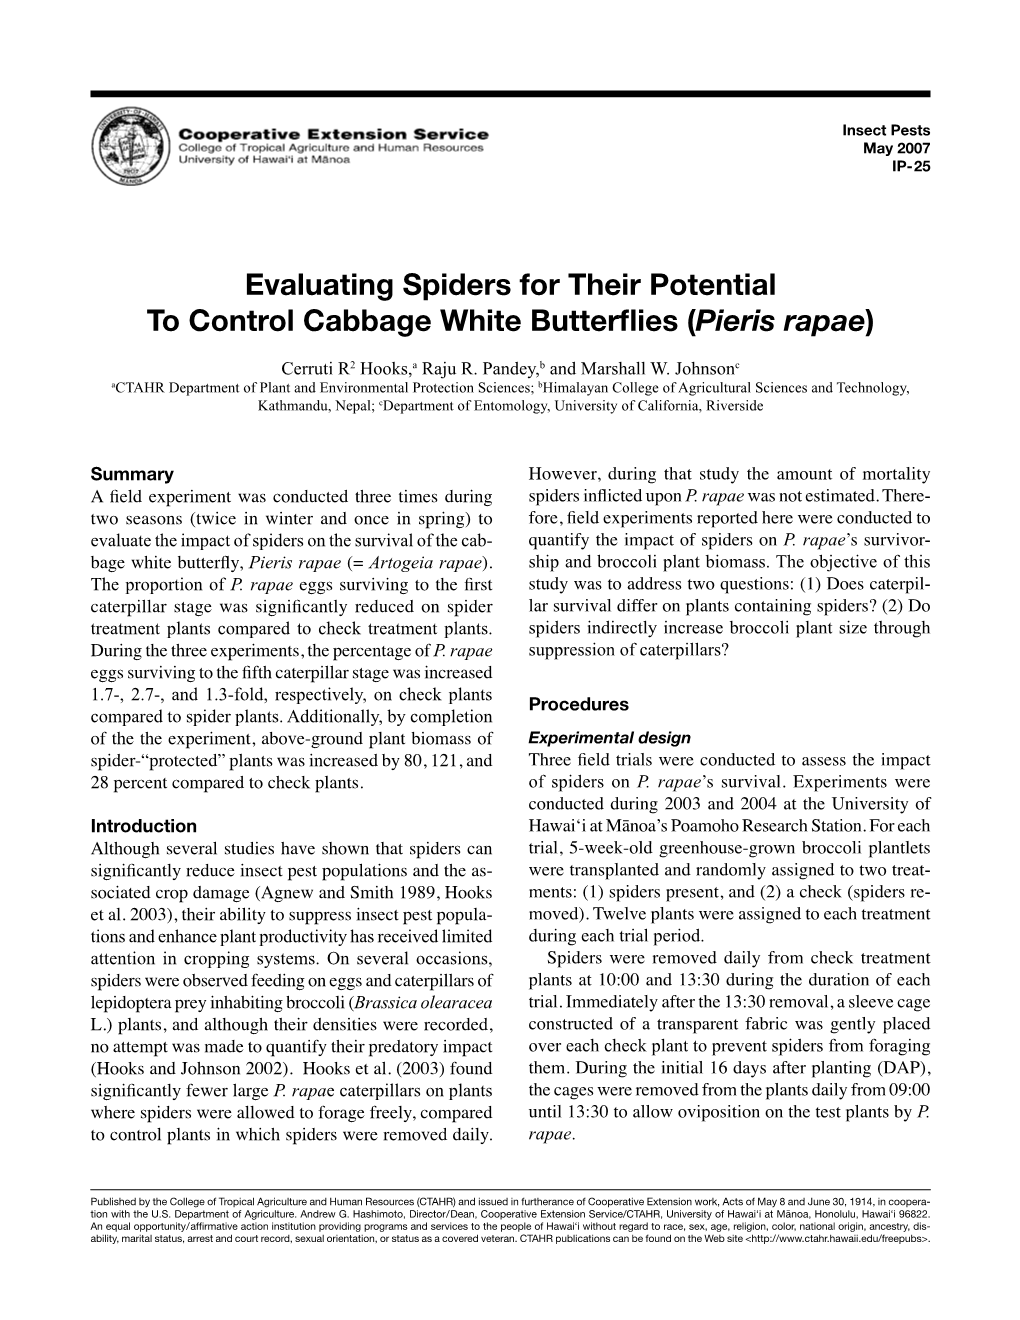 Evaluating Spiders for Their Potential to Control Cabbage White Butterflies (Pieris Rapae)